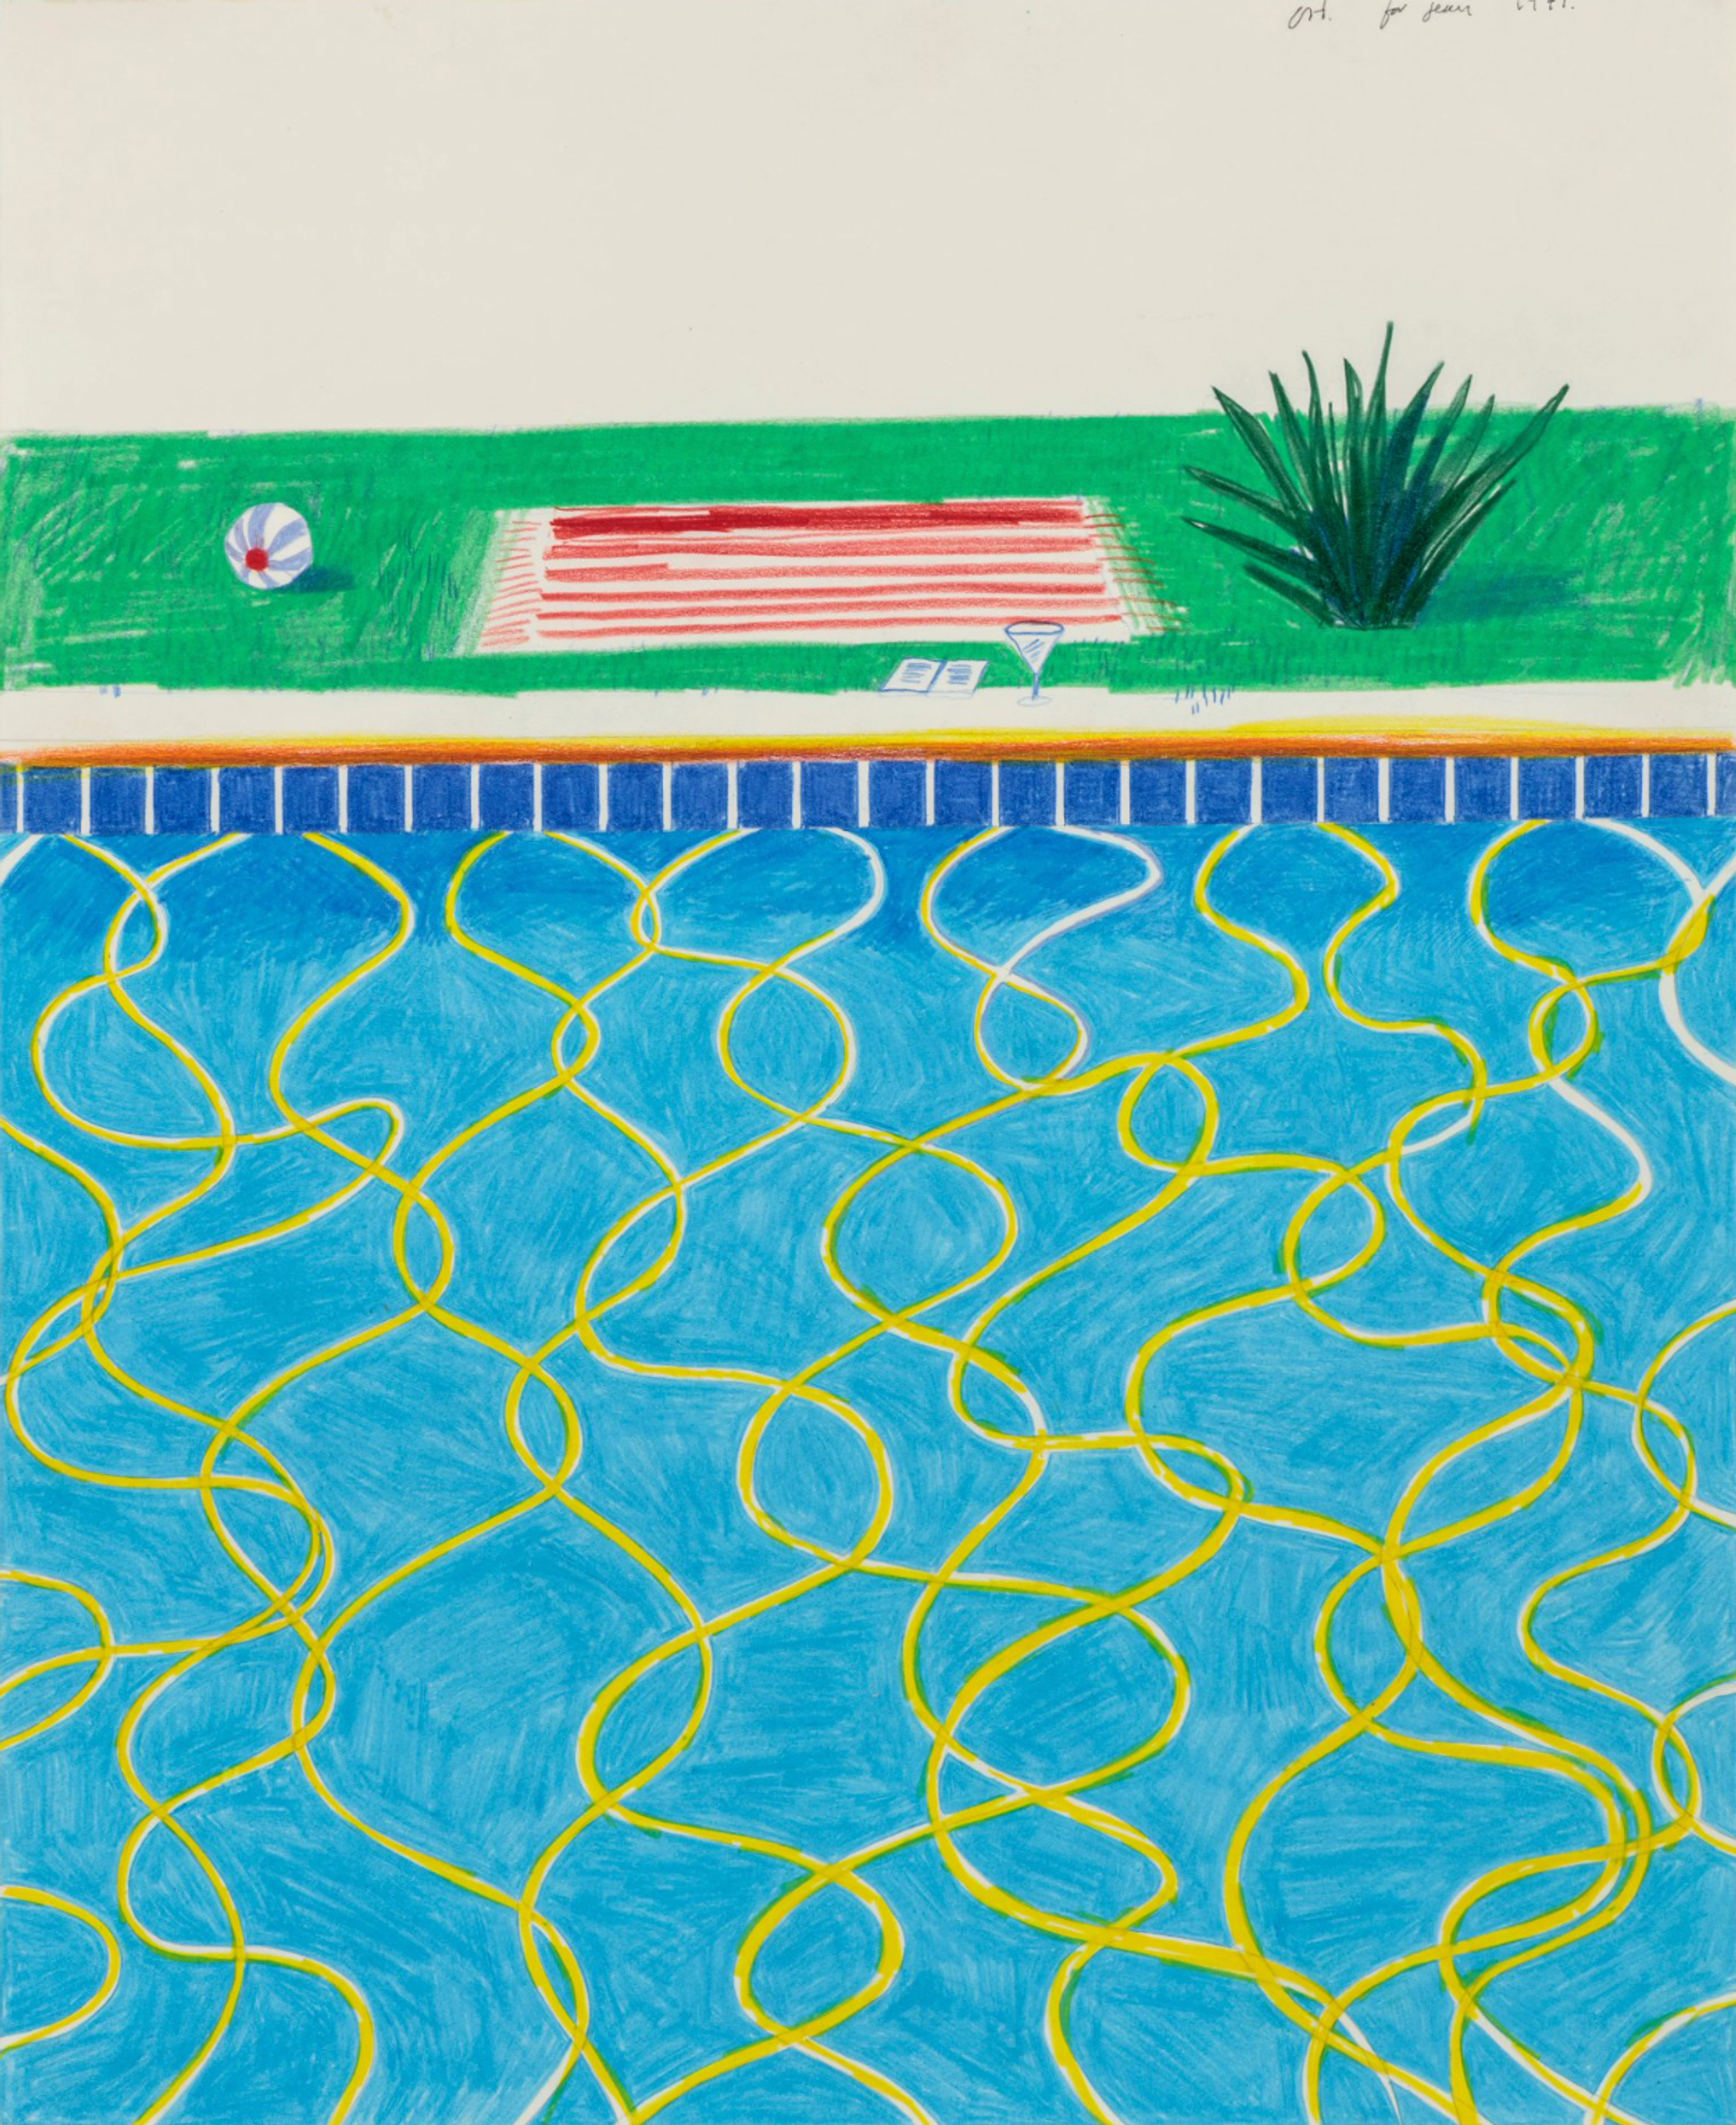 Drawing of a cropped pool on paper by David Hockney, featuring a towel, martini glass, and open book by the poolside. Vibrant blues and greens dominate the artwork, while yellow ripples symbolise the sun’s rays on the water.